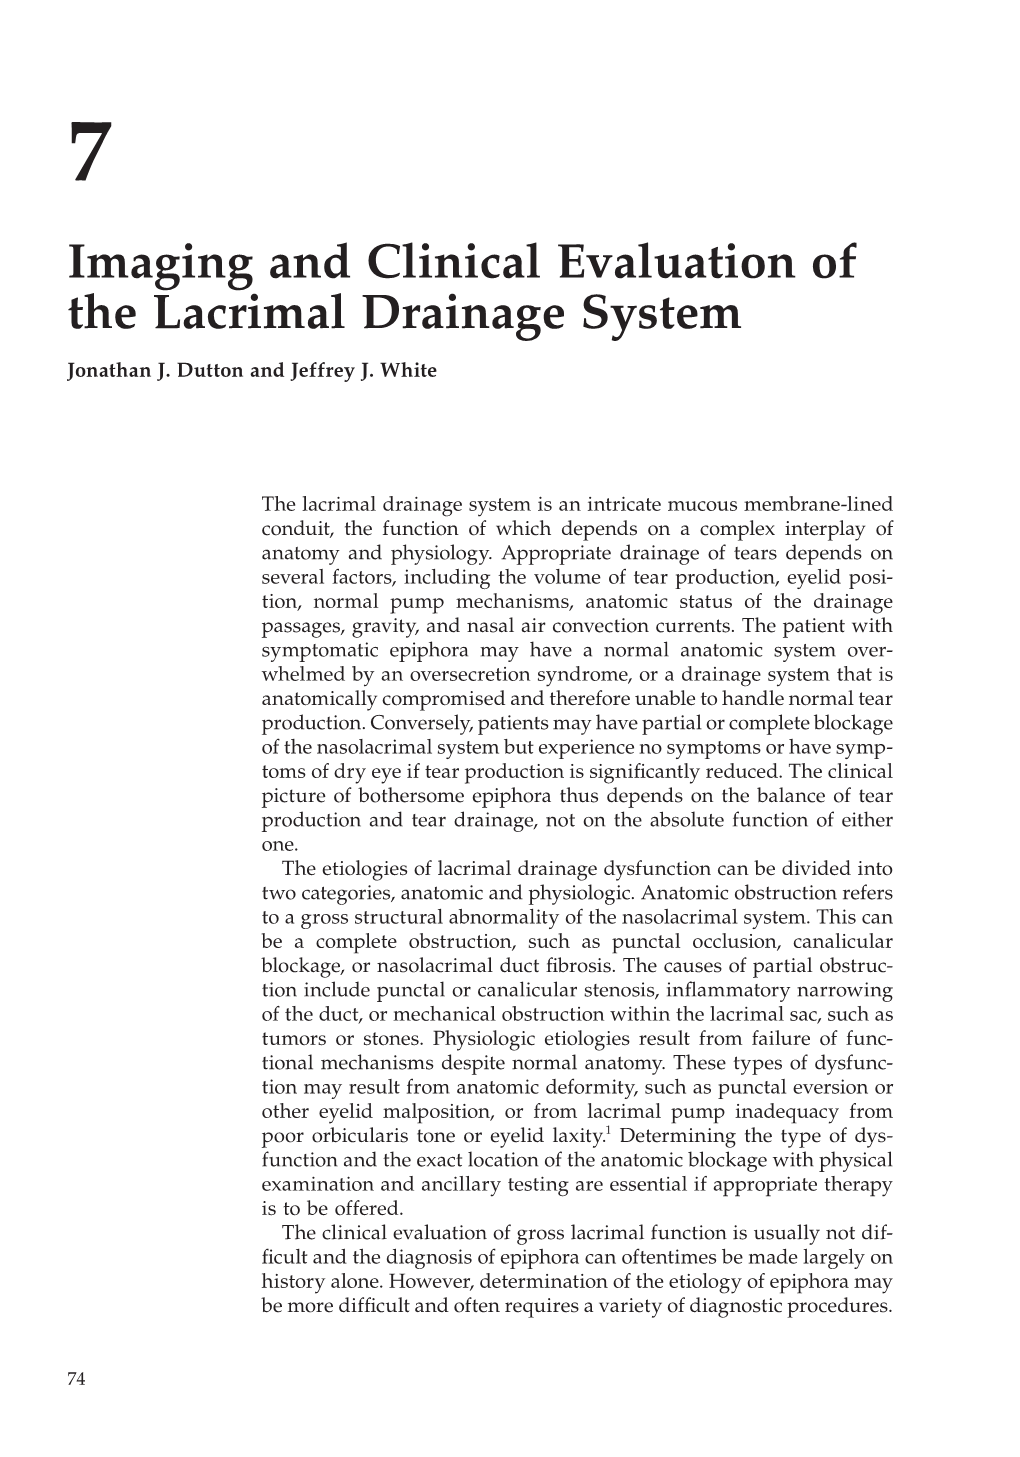 Imaging and Clinical Evaluation of the Lacrimal Drainage System